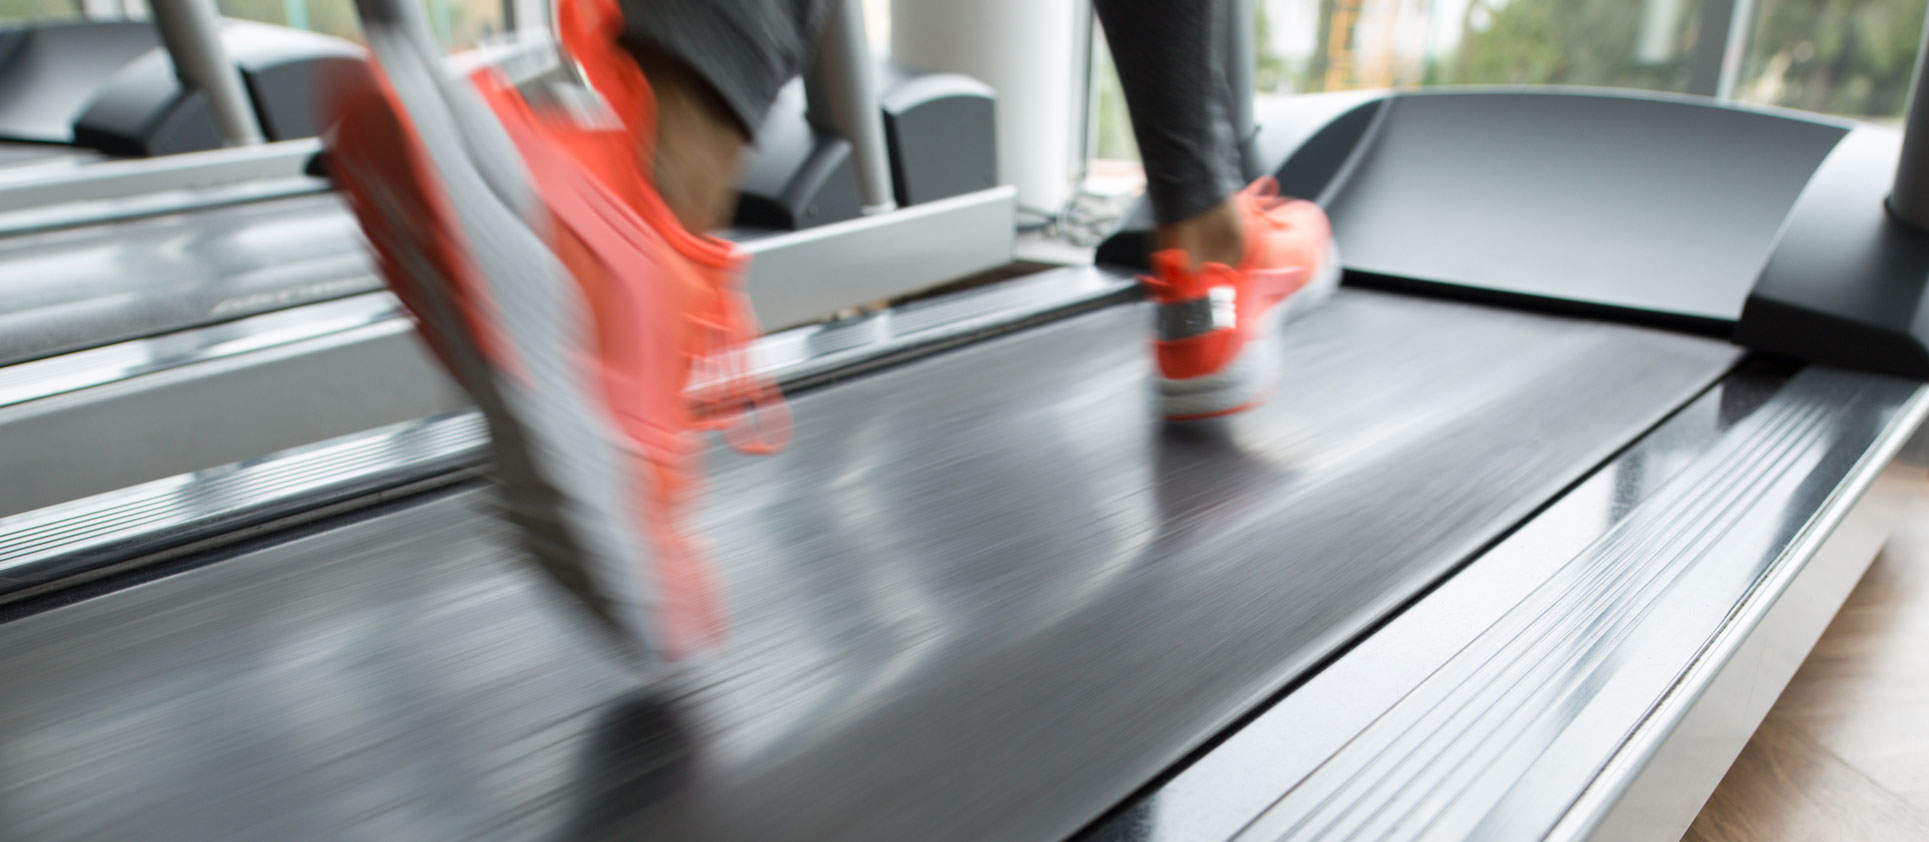 Maintenance: Cleaning Your Treadmill